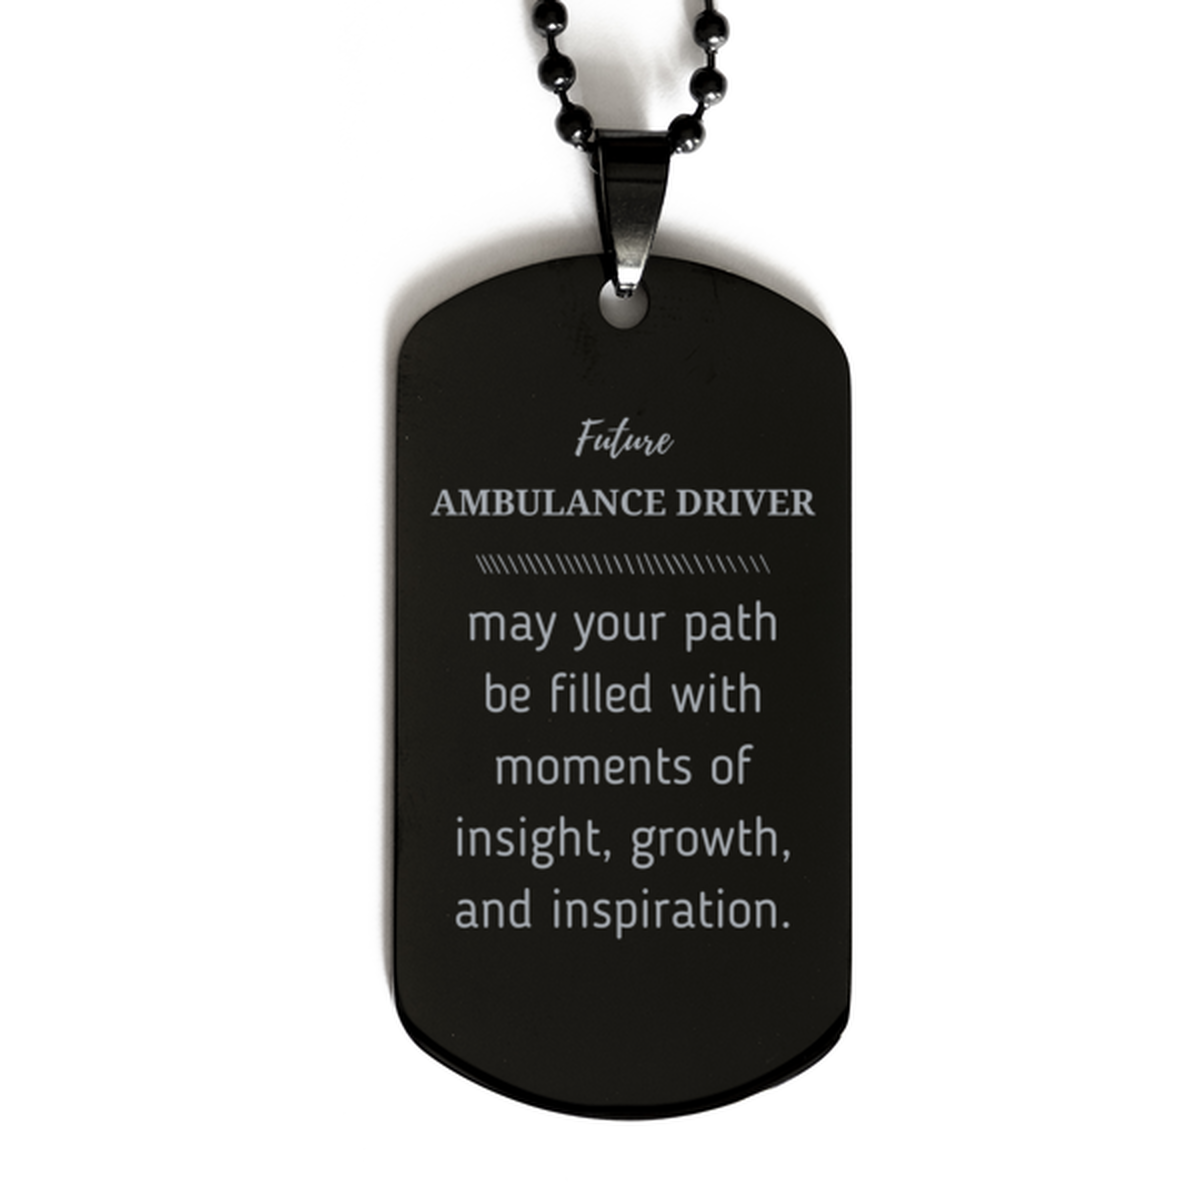 Future Ambulance Driver Gifts, May your path be filled with moments of insight, Graduation Gifts for New Ambulance Driver, Christmas Unique Black Dog Tag For Men, Women, Friends